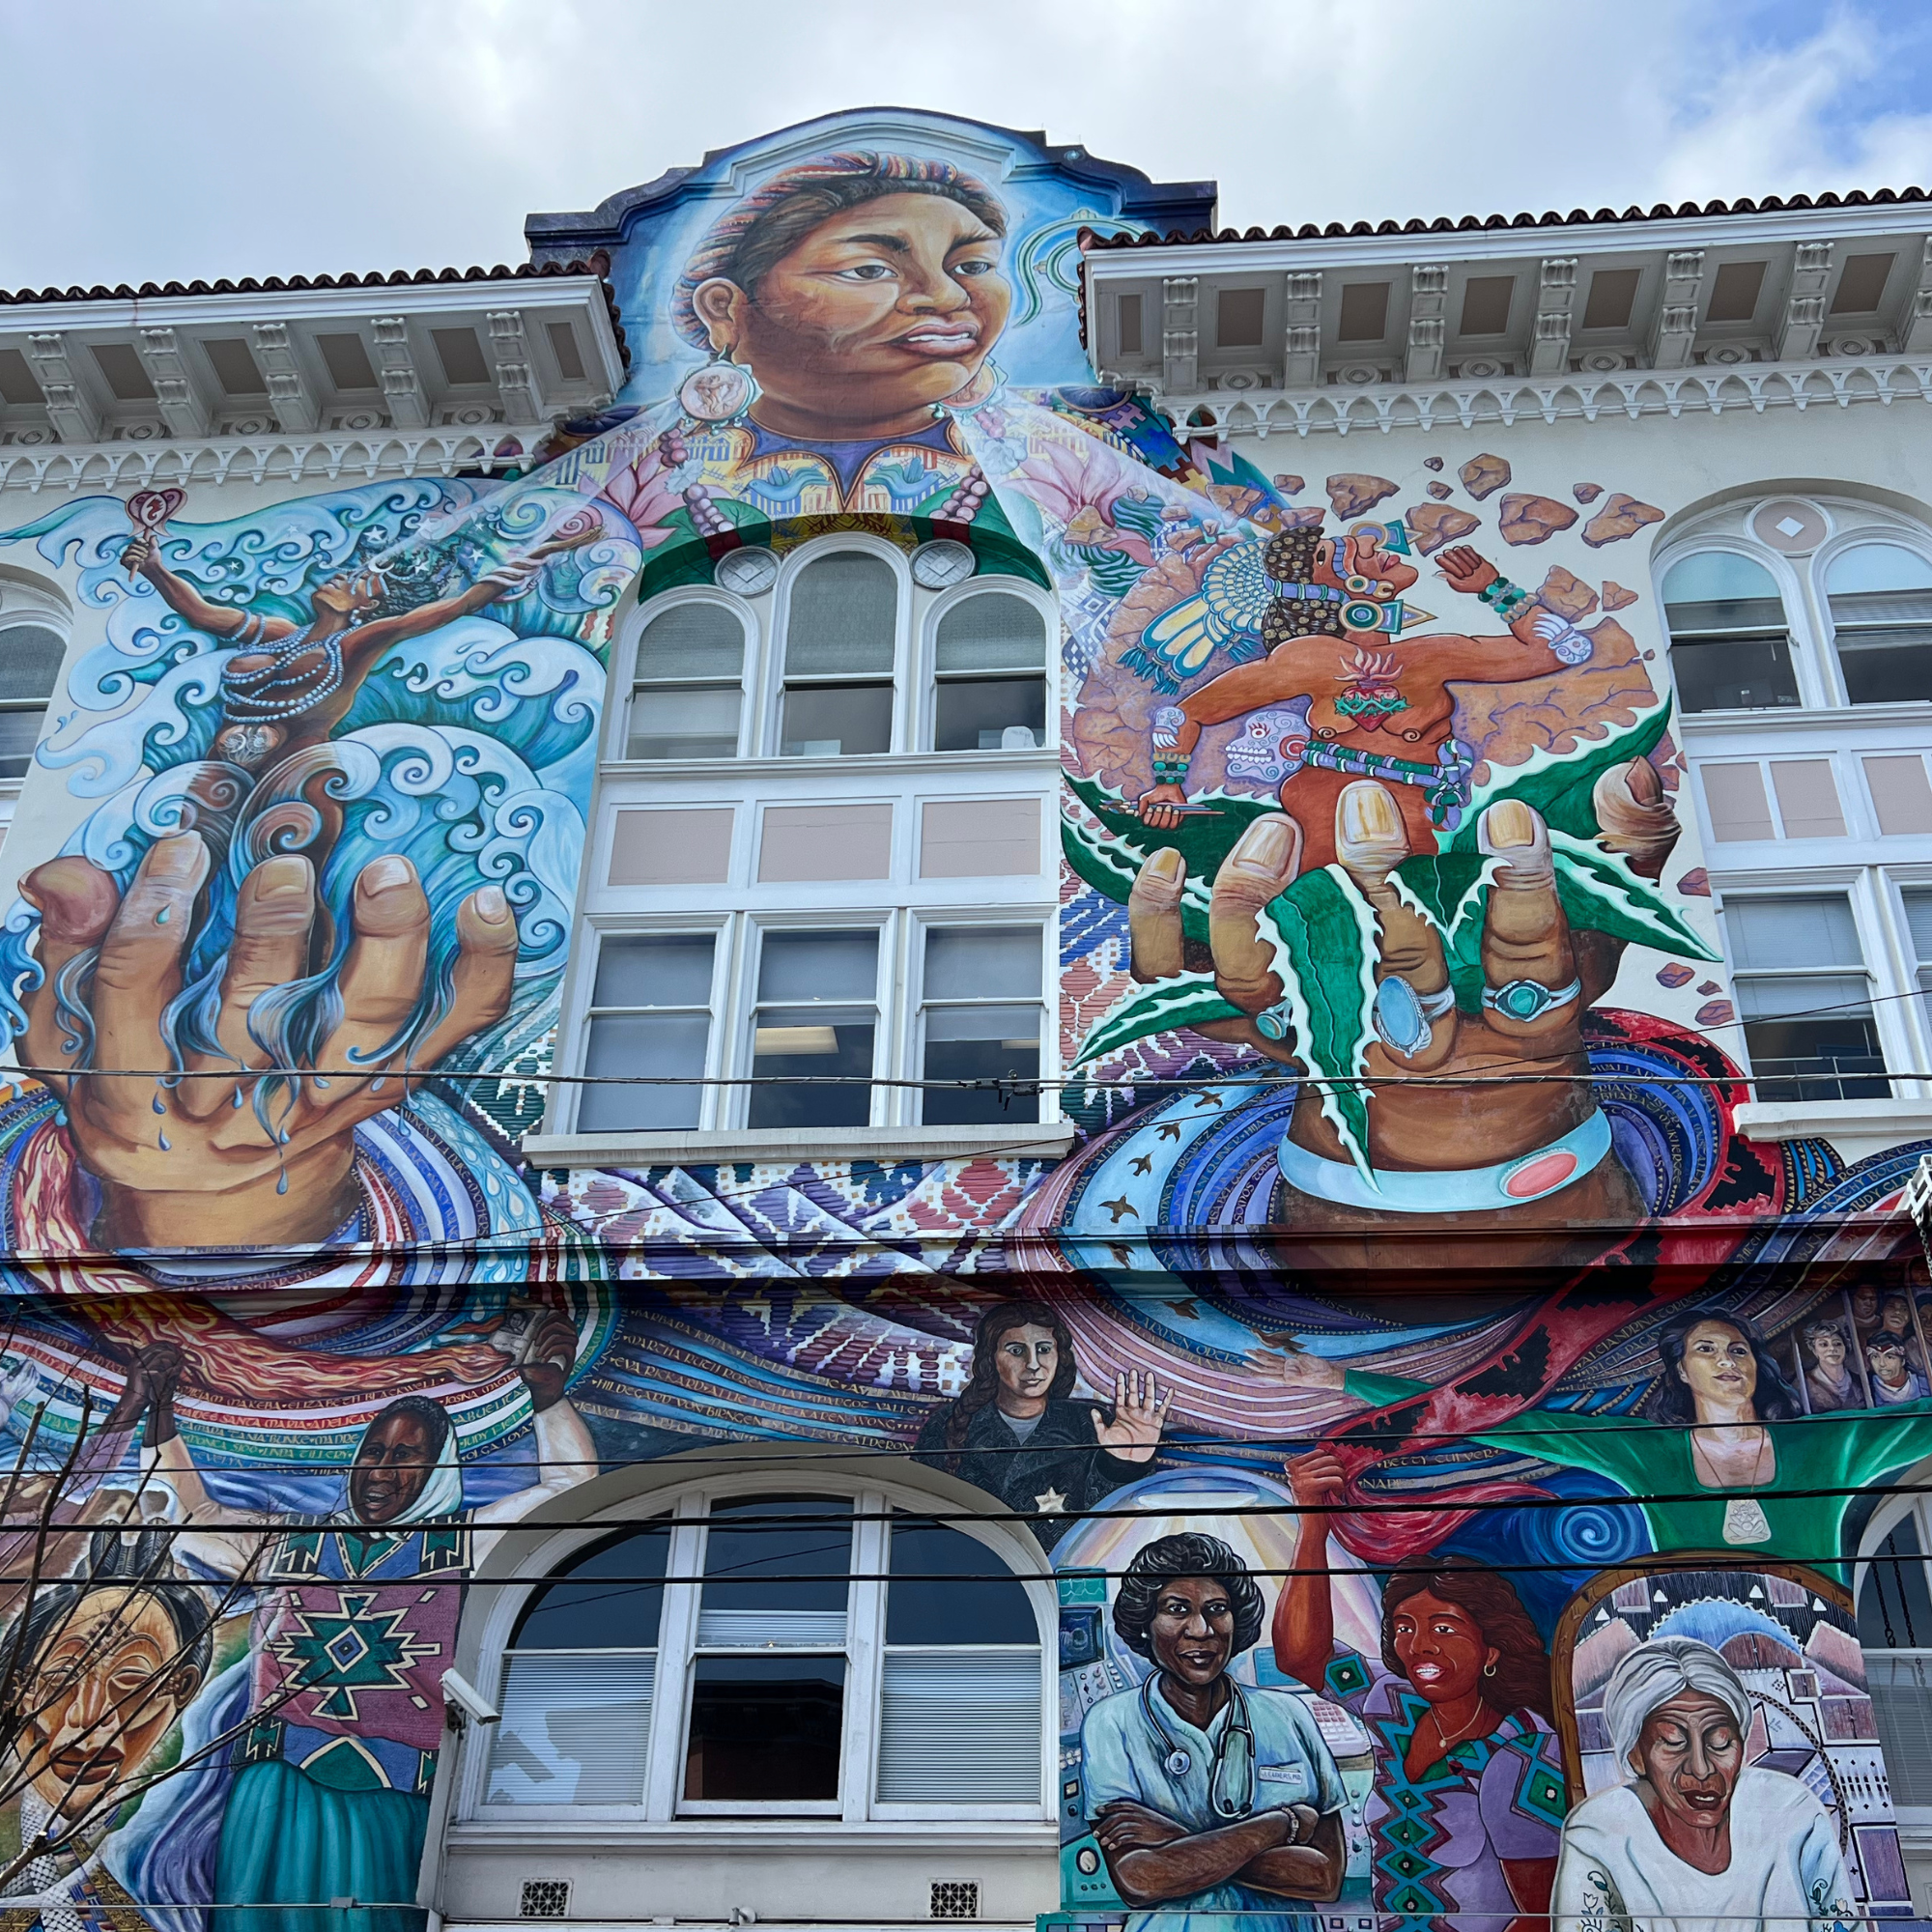 The Women's Building mural in San Francisco's Mission neighborhood. Mural images courtesy of the artists ©1994-2009 Artists. All Rights Reserved. Thanks to artists Juana Alicia, Miranda Bergman, Edythe Boone, Susan Kelk Cervantes, Meera Desai, Yvonne Littleton and Irene Perez.